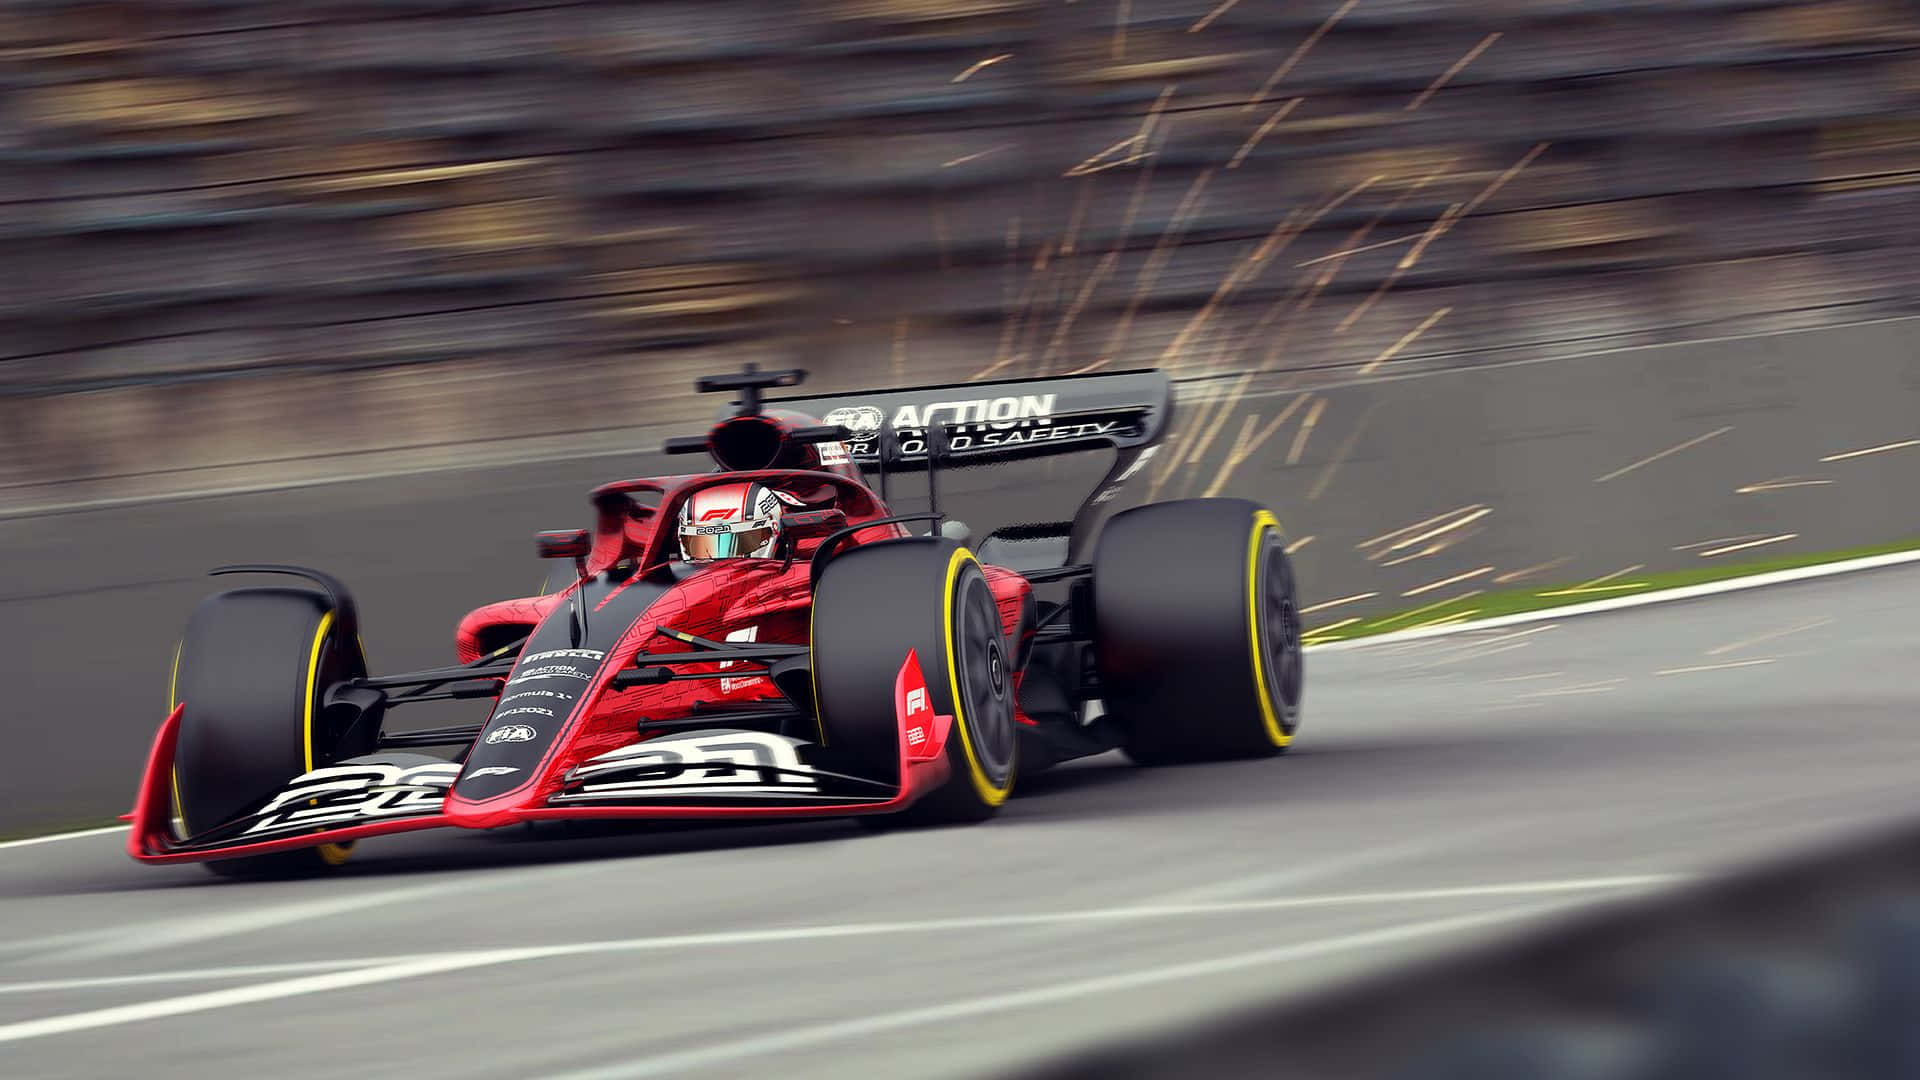 Step up your gaming experience with the newest F1 game Wallpaper